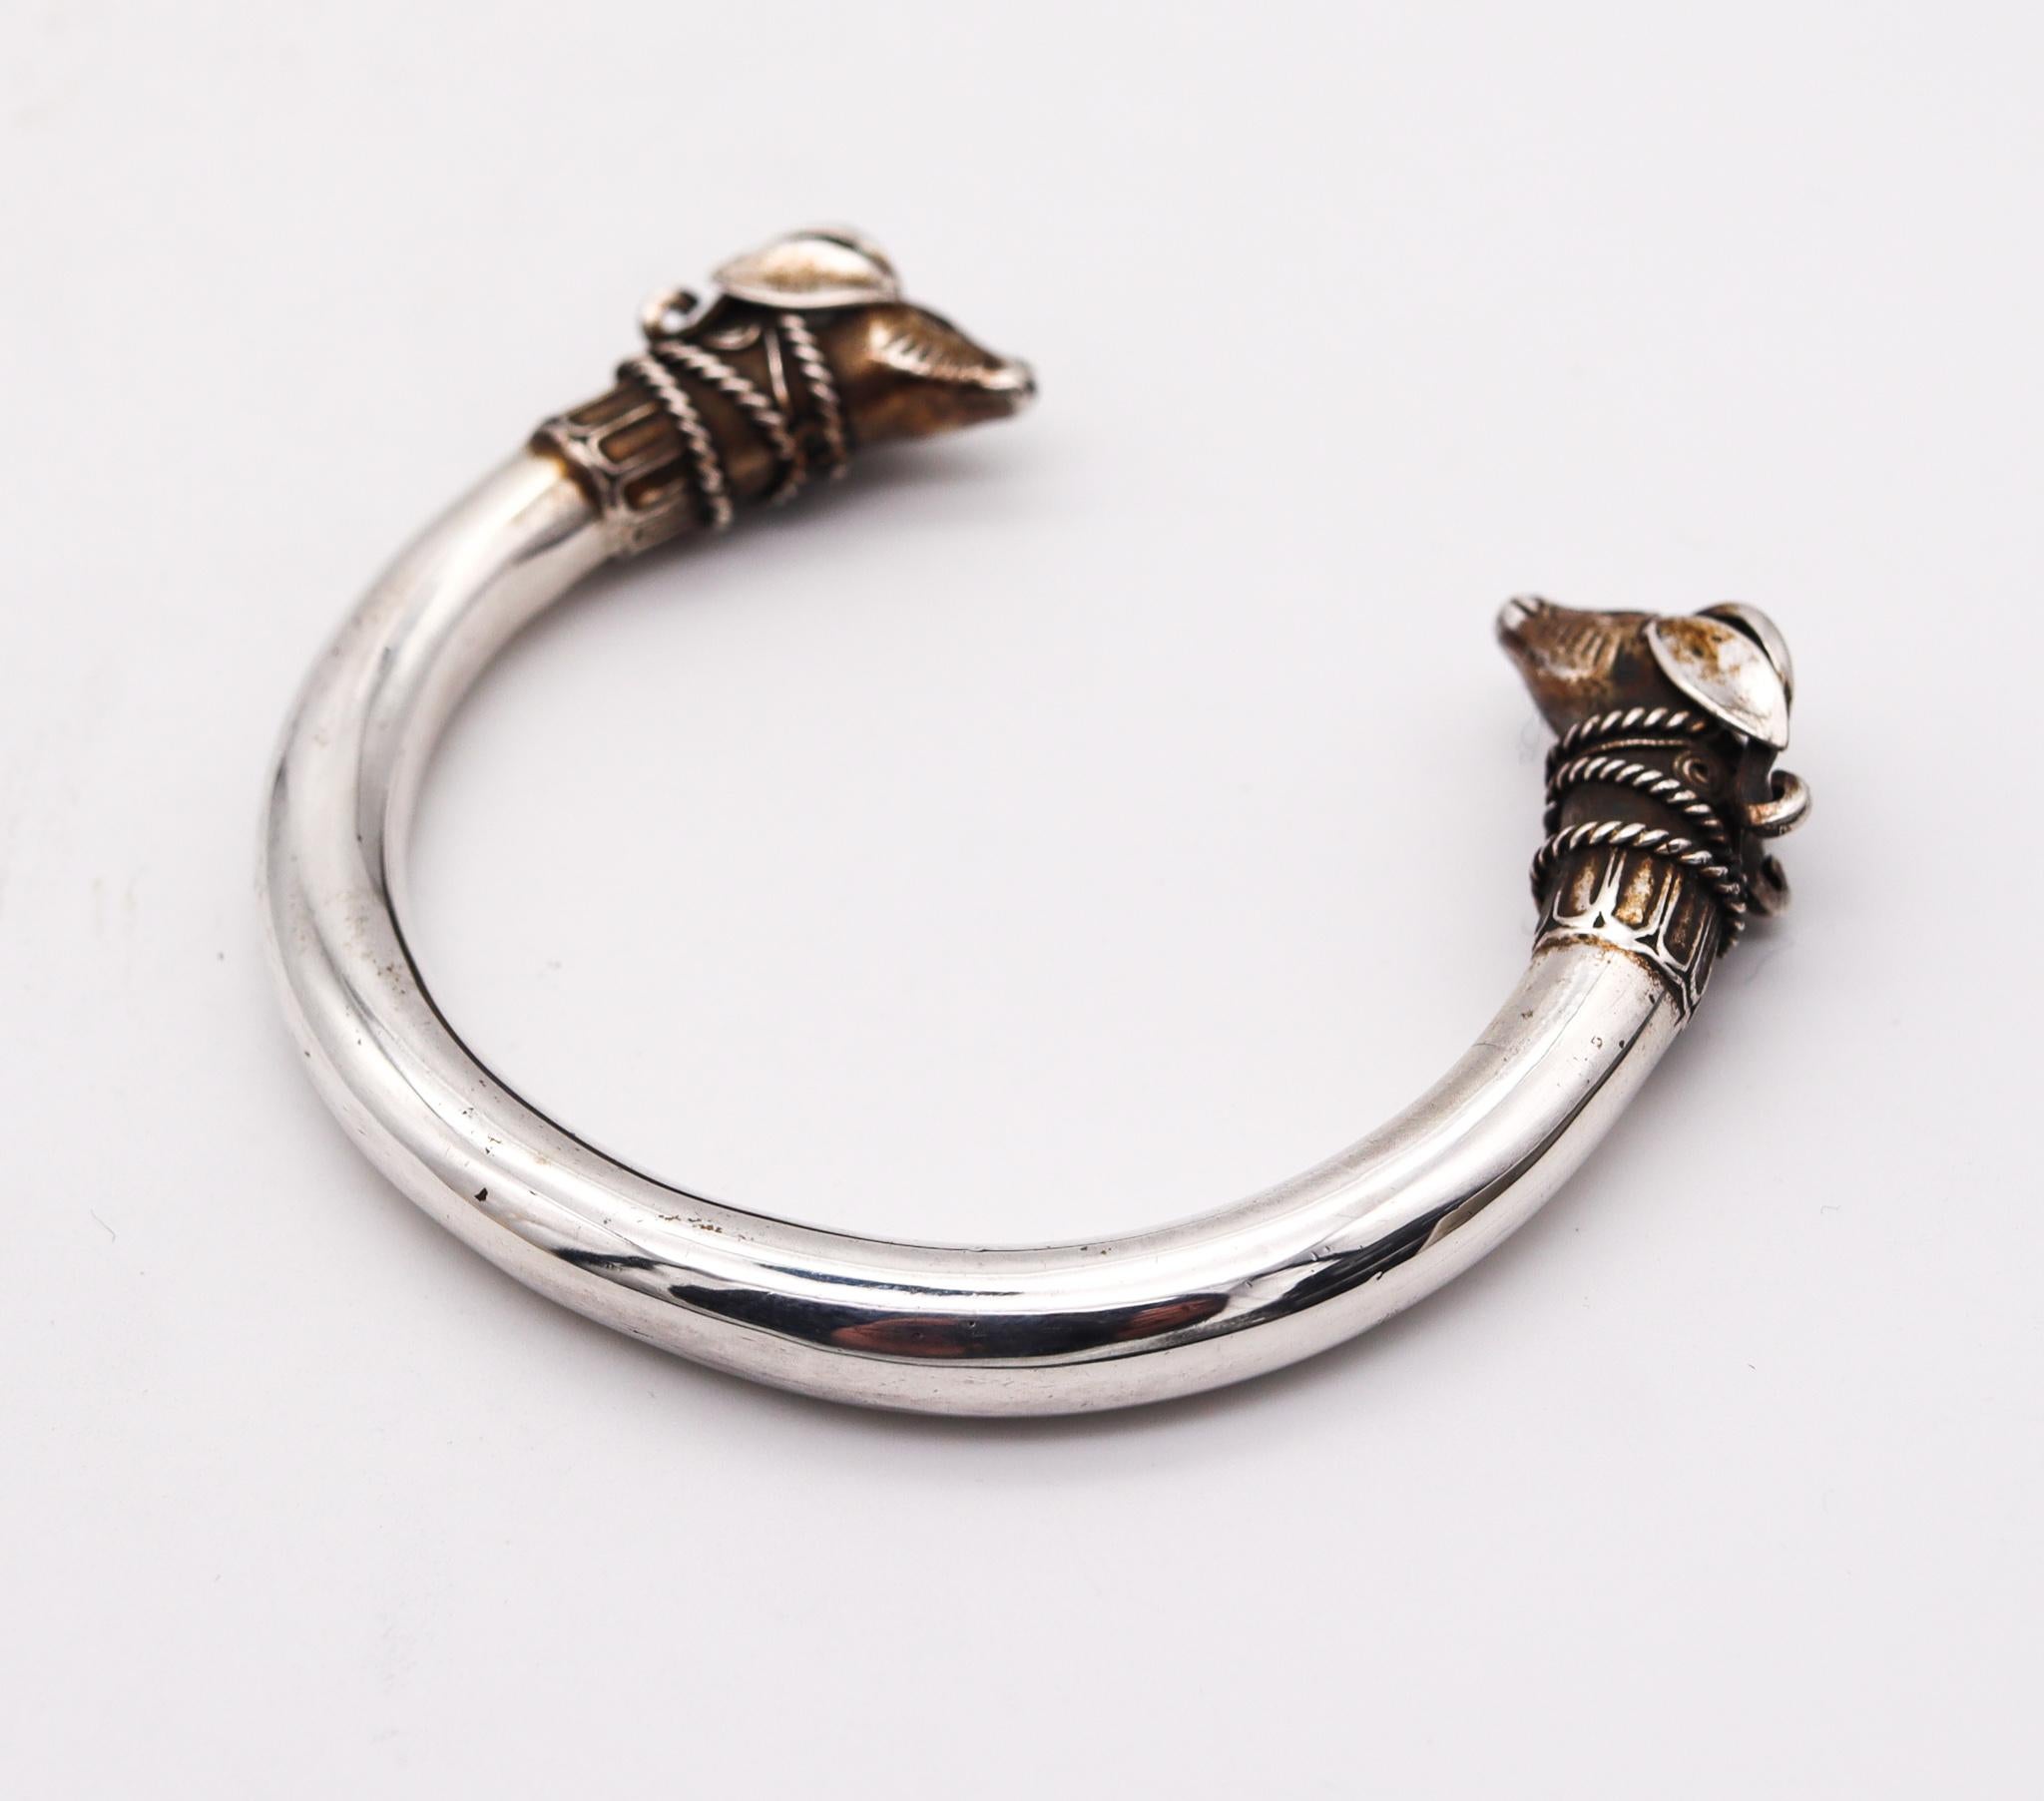 French Etruscan Revival Rams Bracelet Cuff in Solid .925 Sterling Silver In Excellent Condition For Sale In Miami, FL